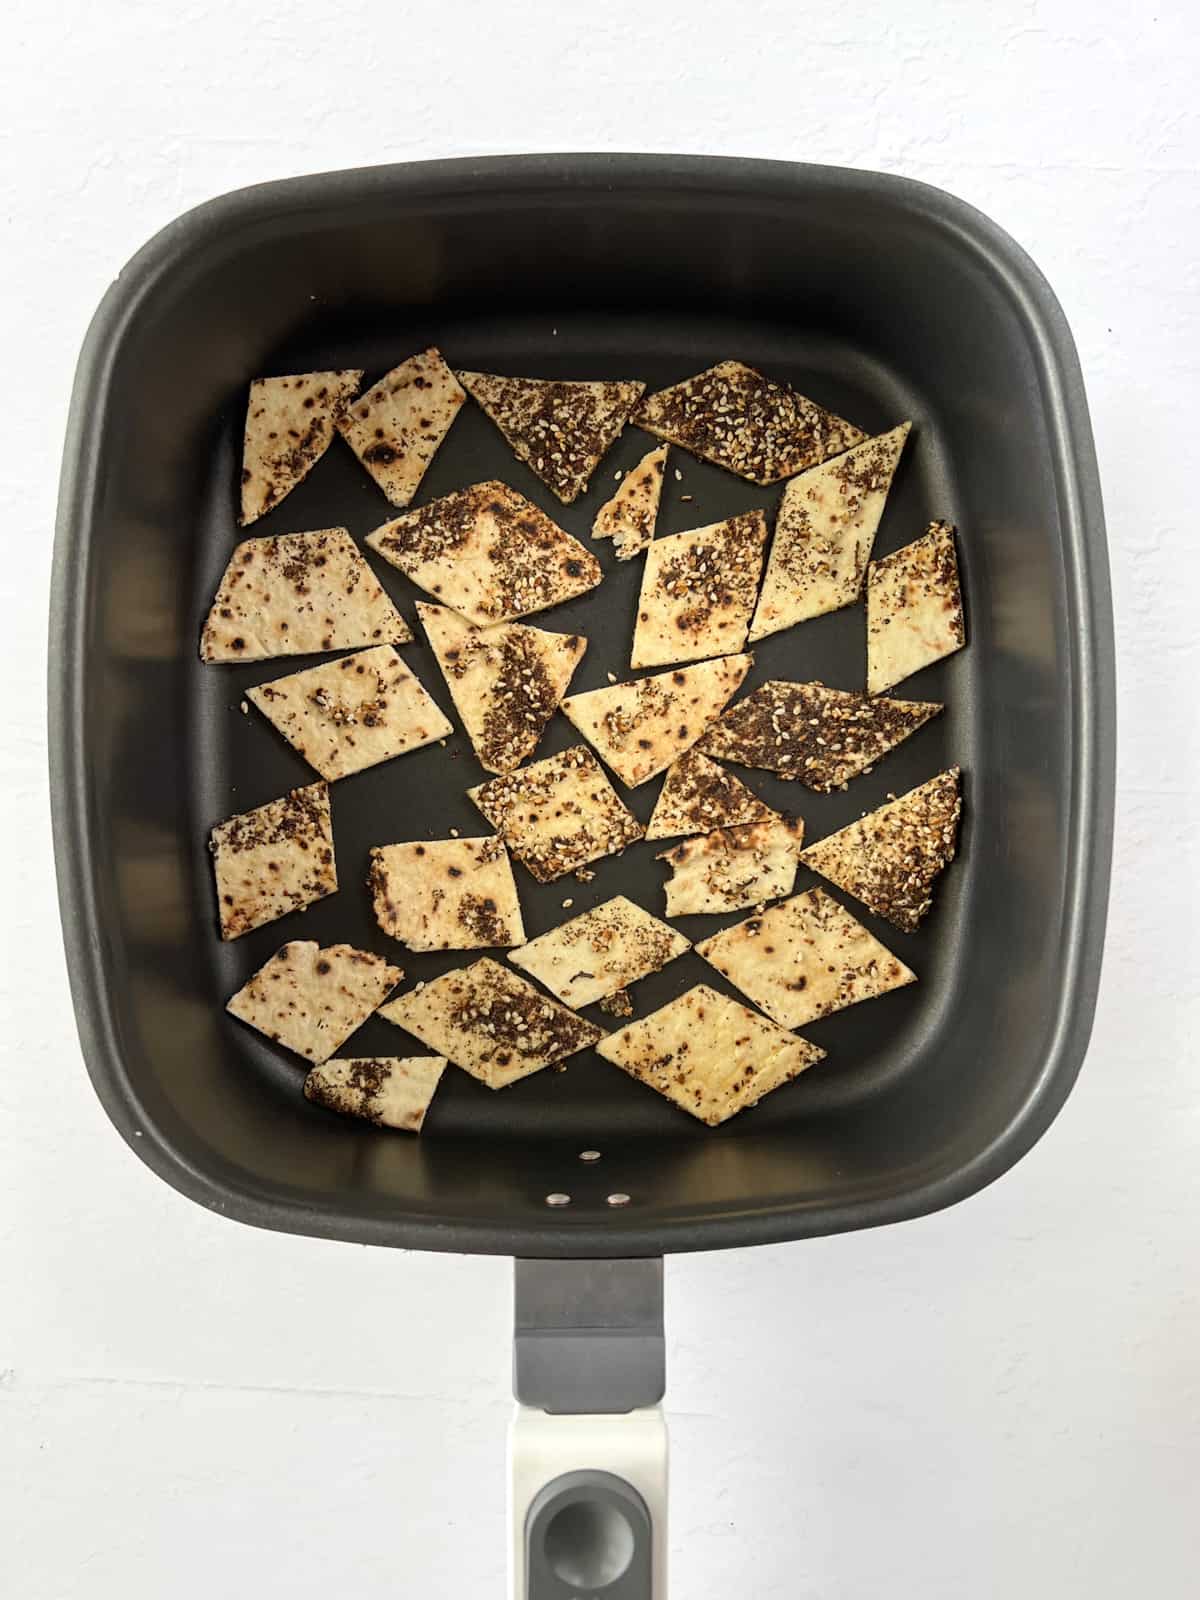 uncooked pita bread pieces coated in seasoning in an air fryer tray